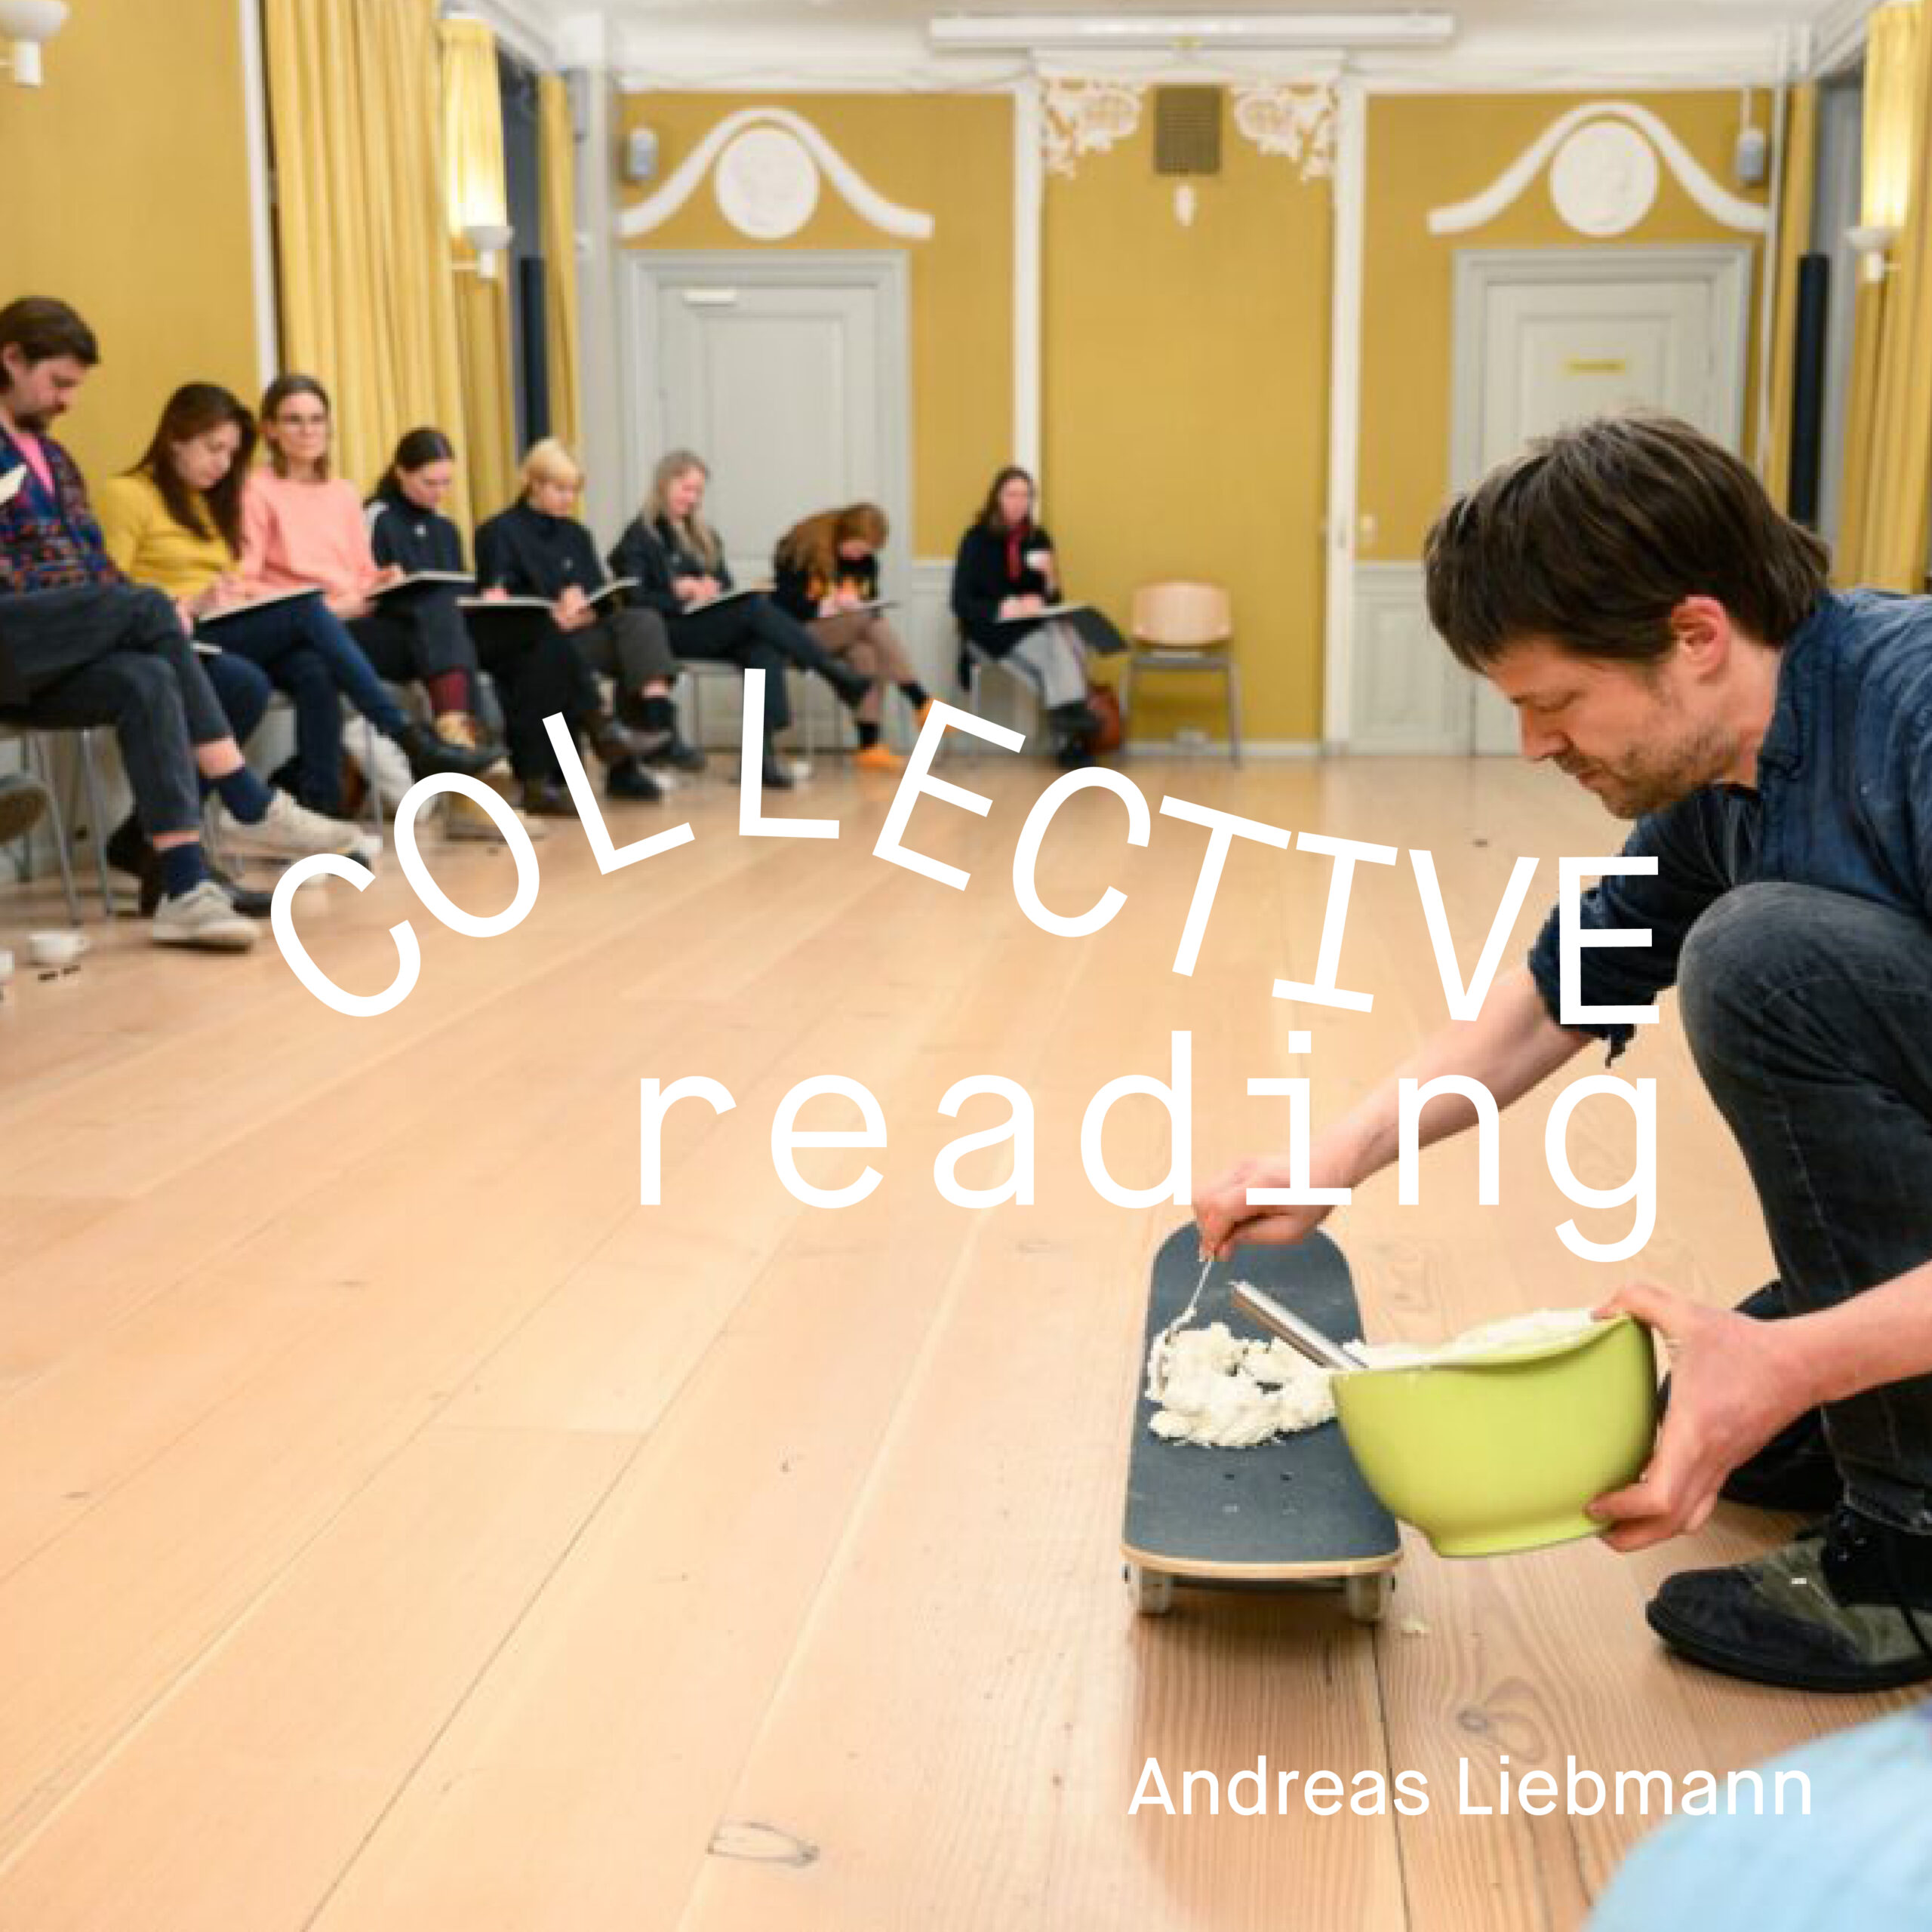 COLLECTIVE READING: Andreas Liebmann